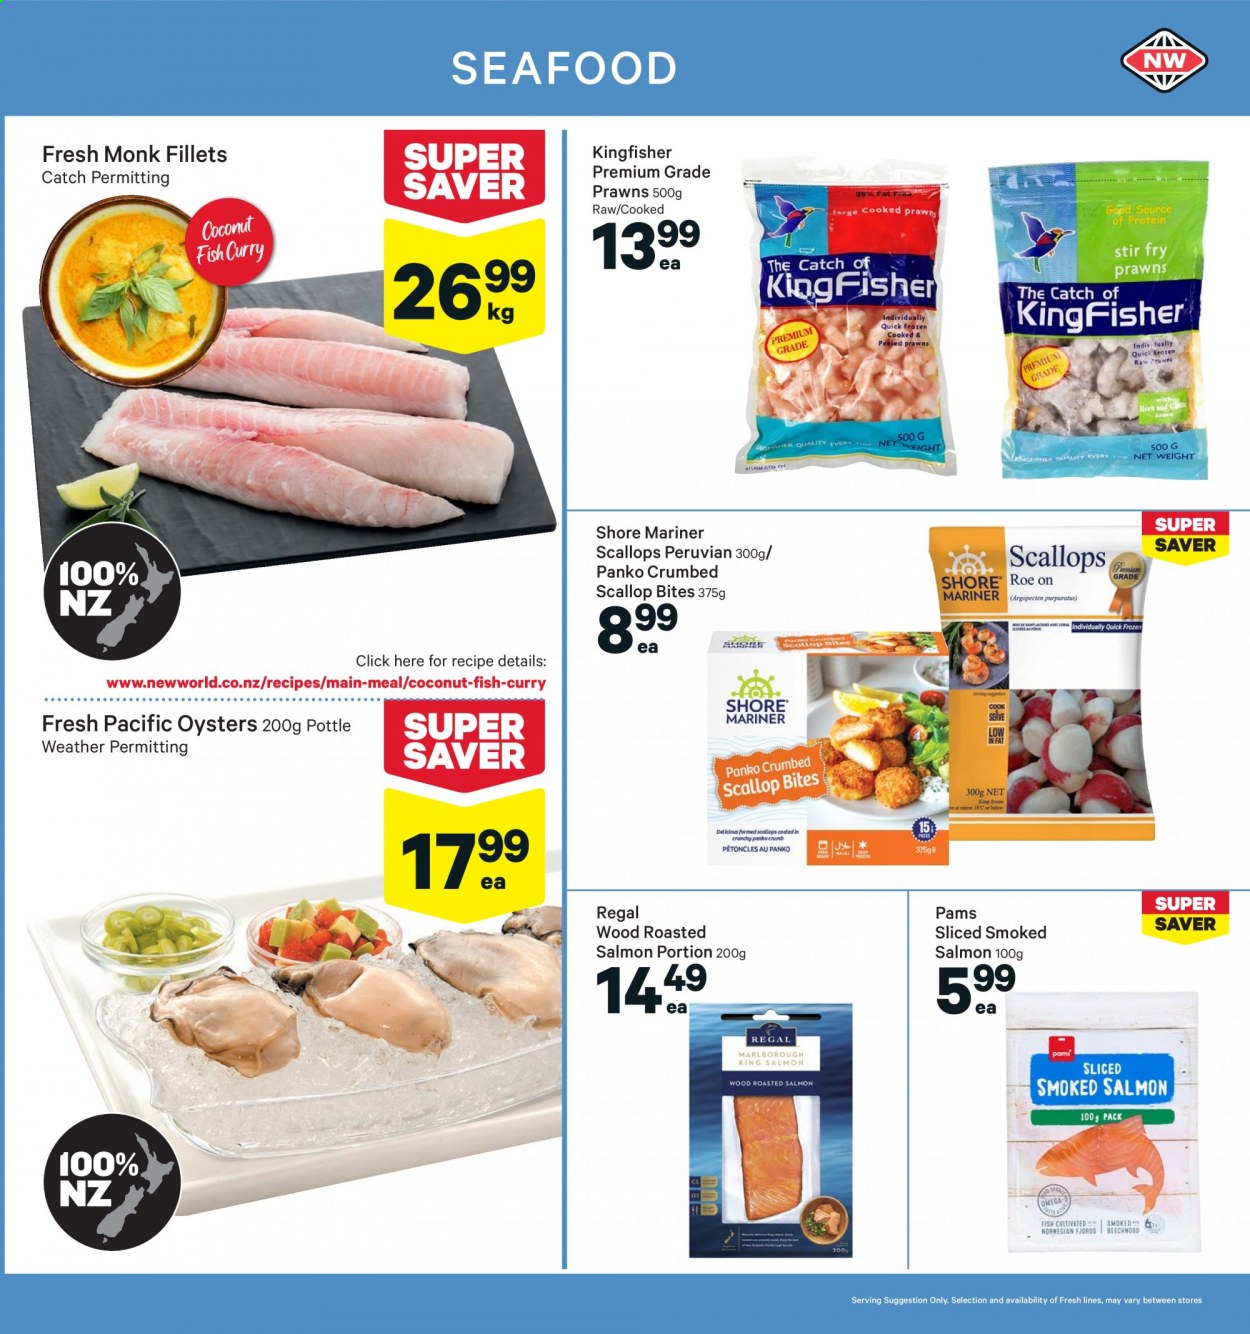 thumbnail - New World mailer - 02.08.2021 - 08.08.2021 - Sales products - panko breadcrumbs, coconut, salmon, scallops, smoked salmon, oysters, seafood, prawns, fish, Shore Mariner, herbs. Page 7.